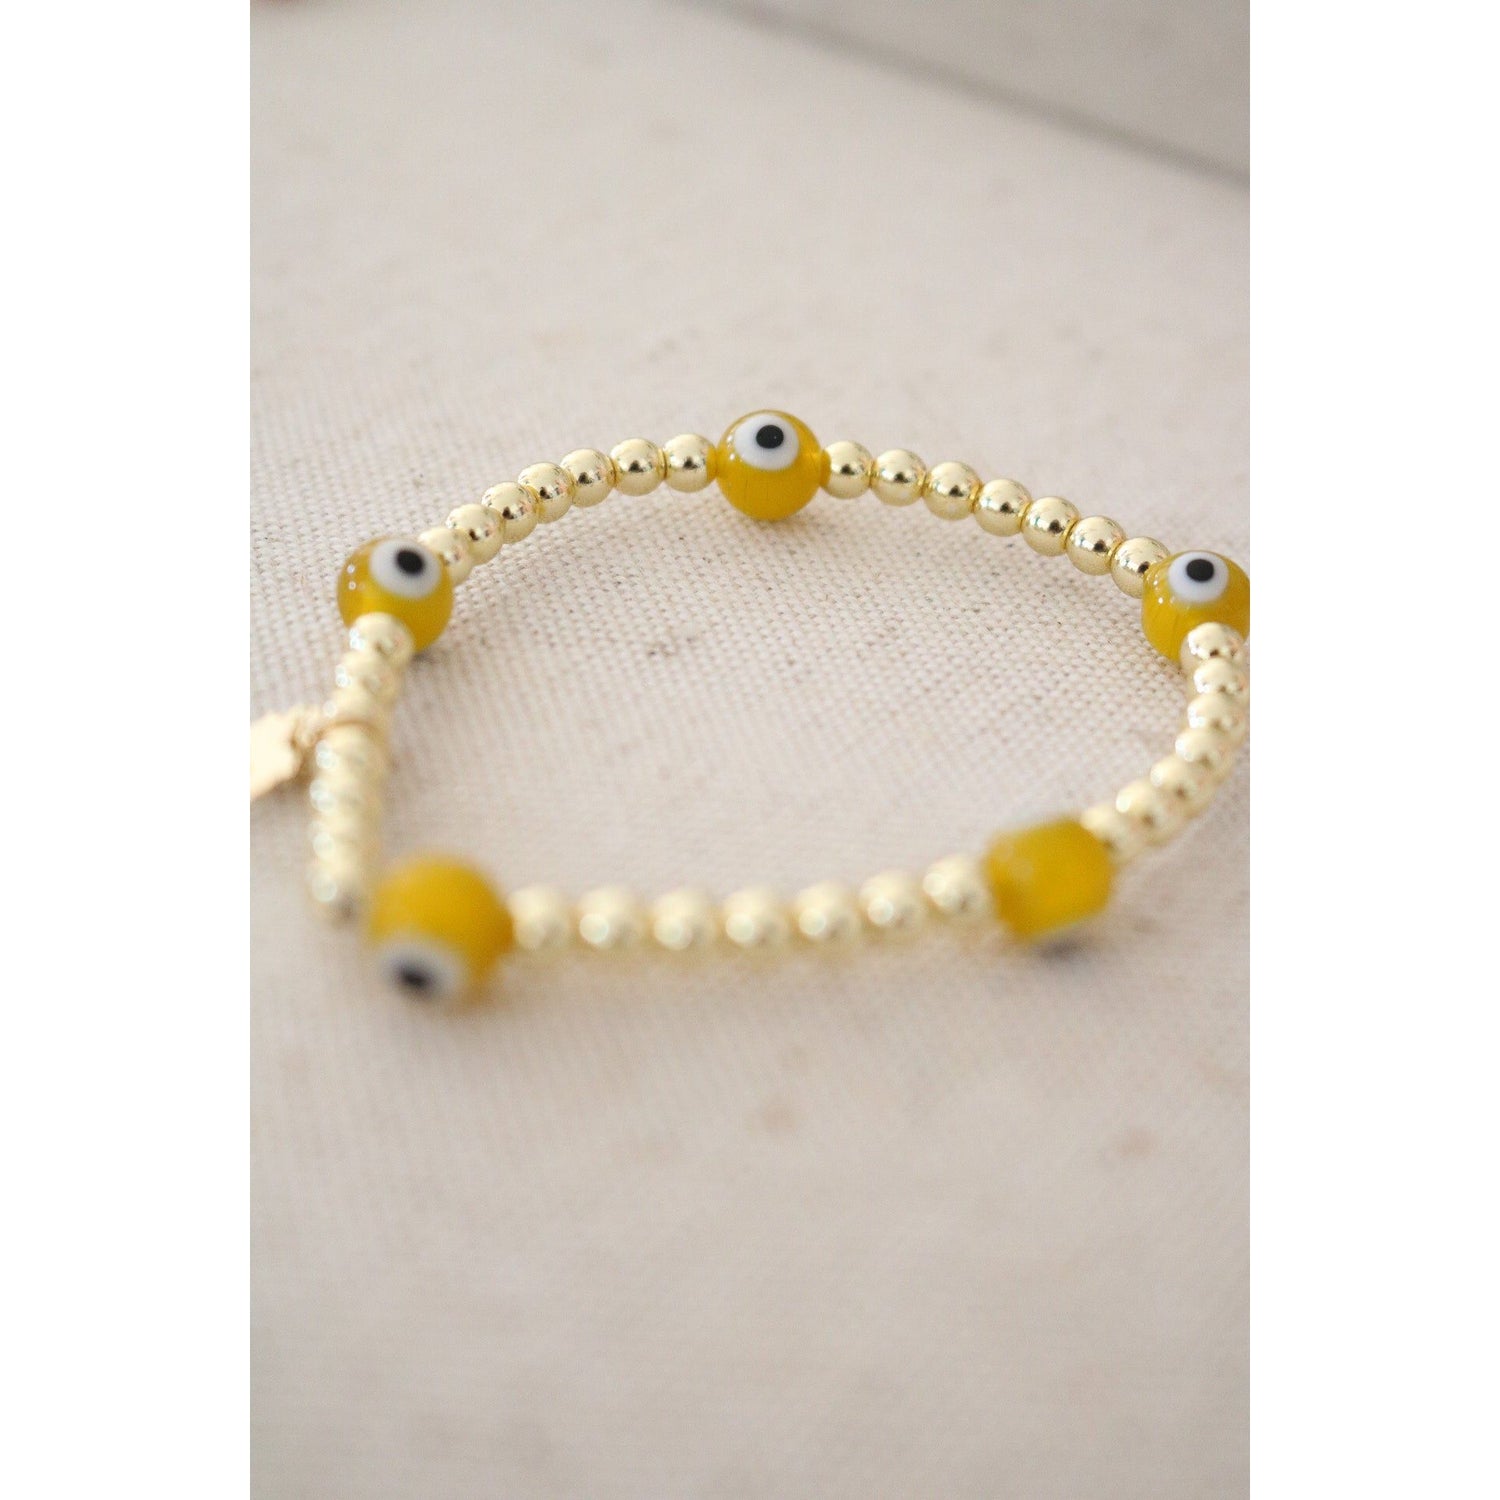 white and yellow evil eye beads on a gold hematite stretch bracelet